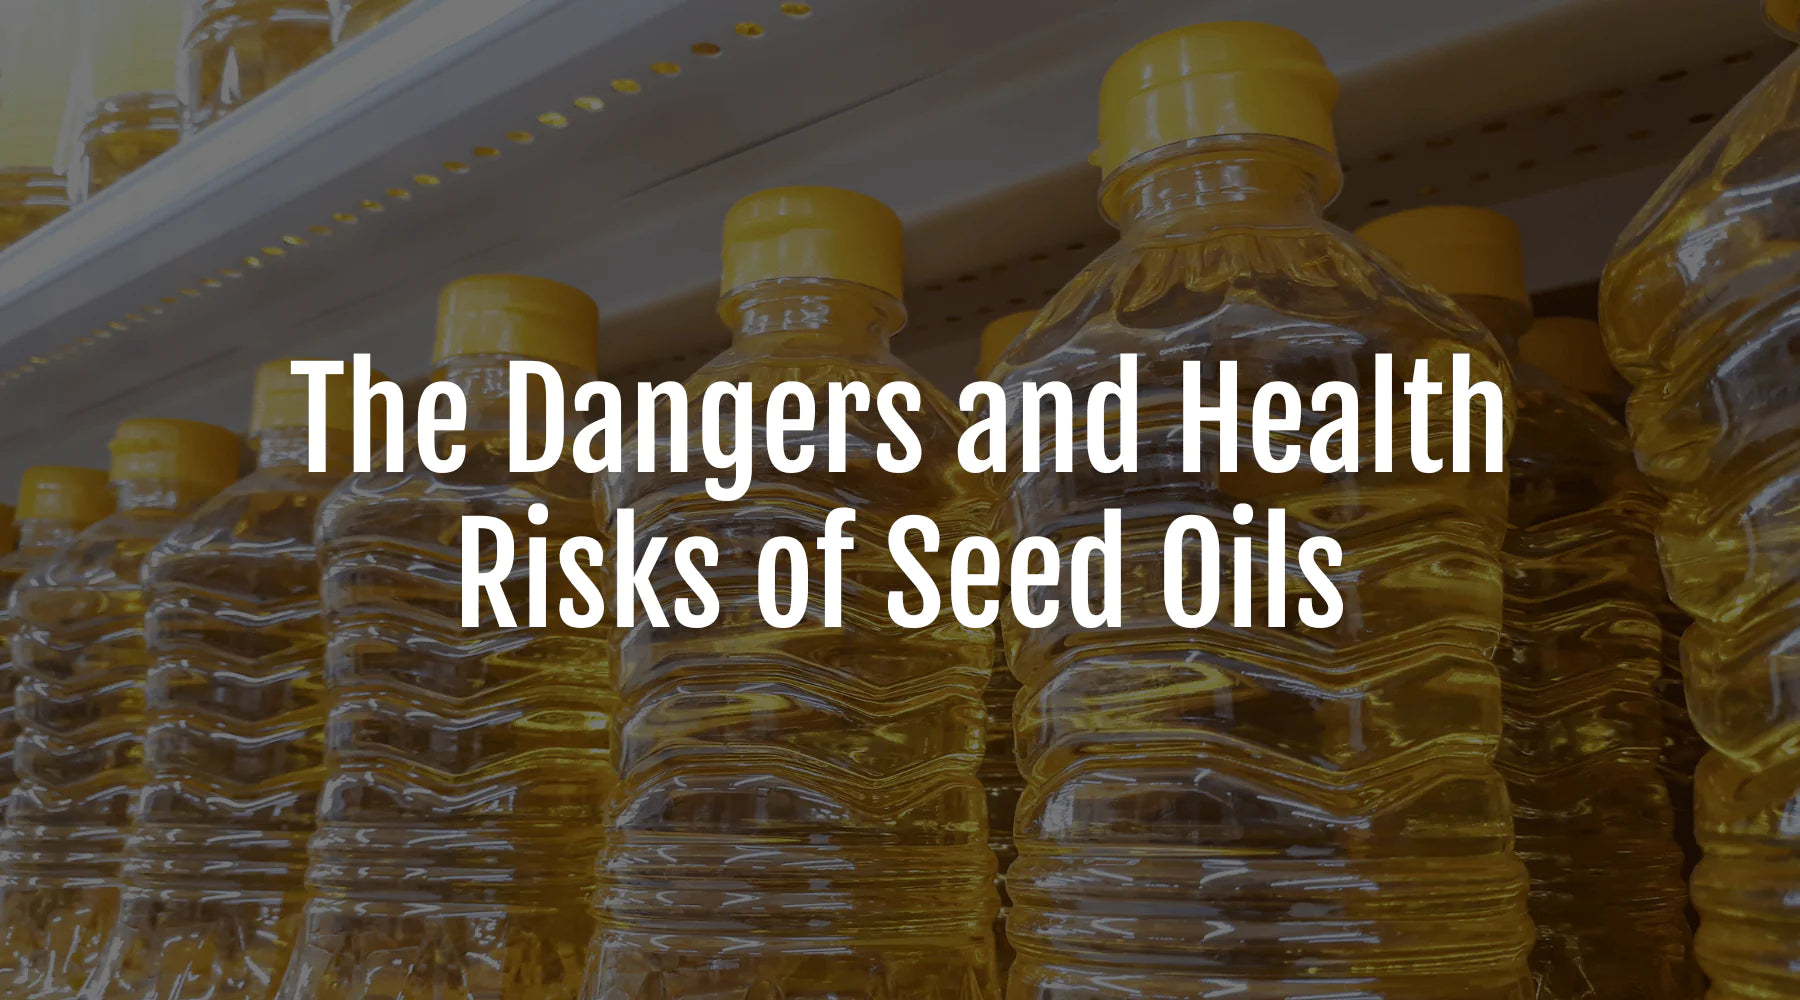 Dangers and Health Risks of Seed Oils